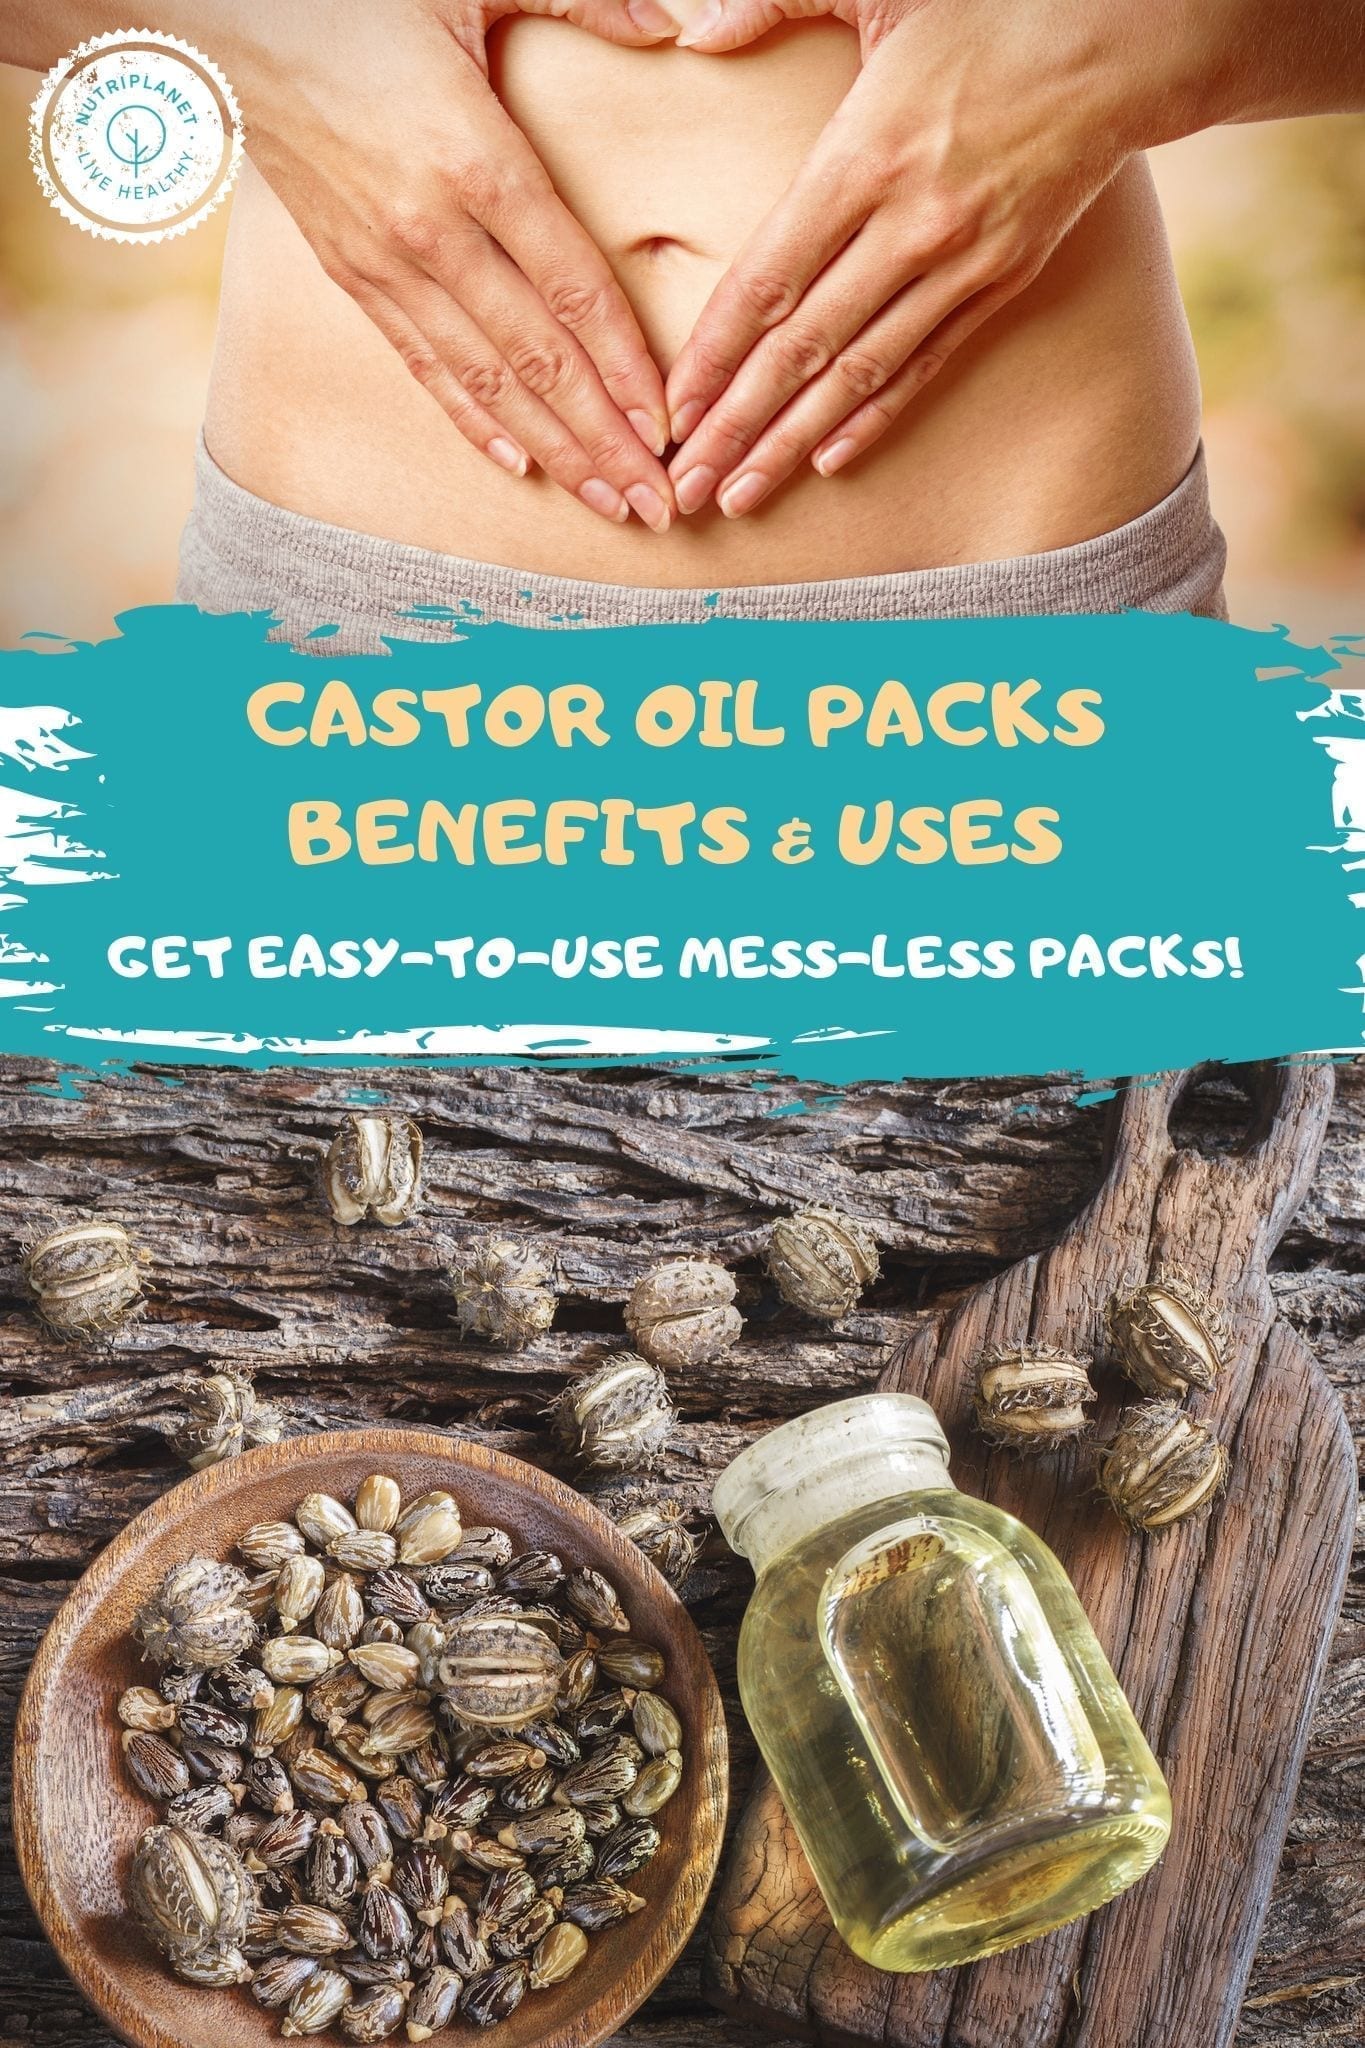 Find out what is castor oil, what are the uses and benefits of castor oil packs, and how to make a castor oil pack.